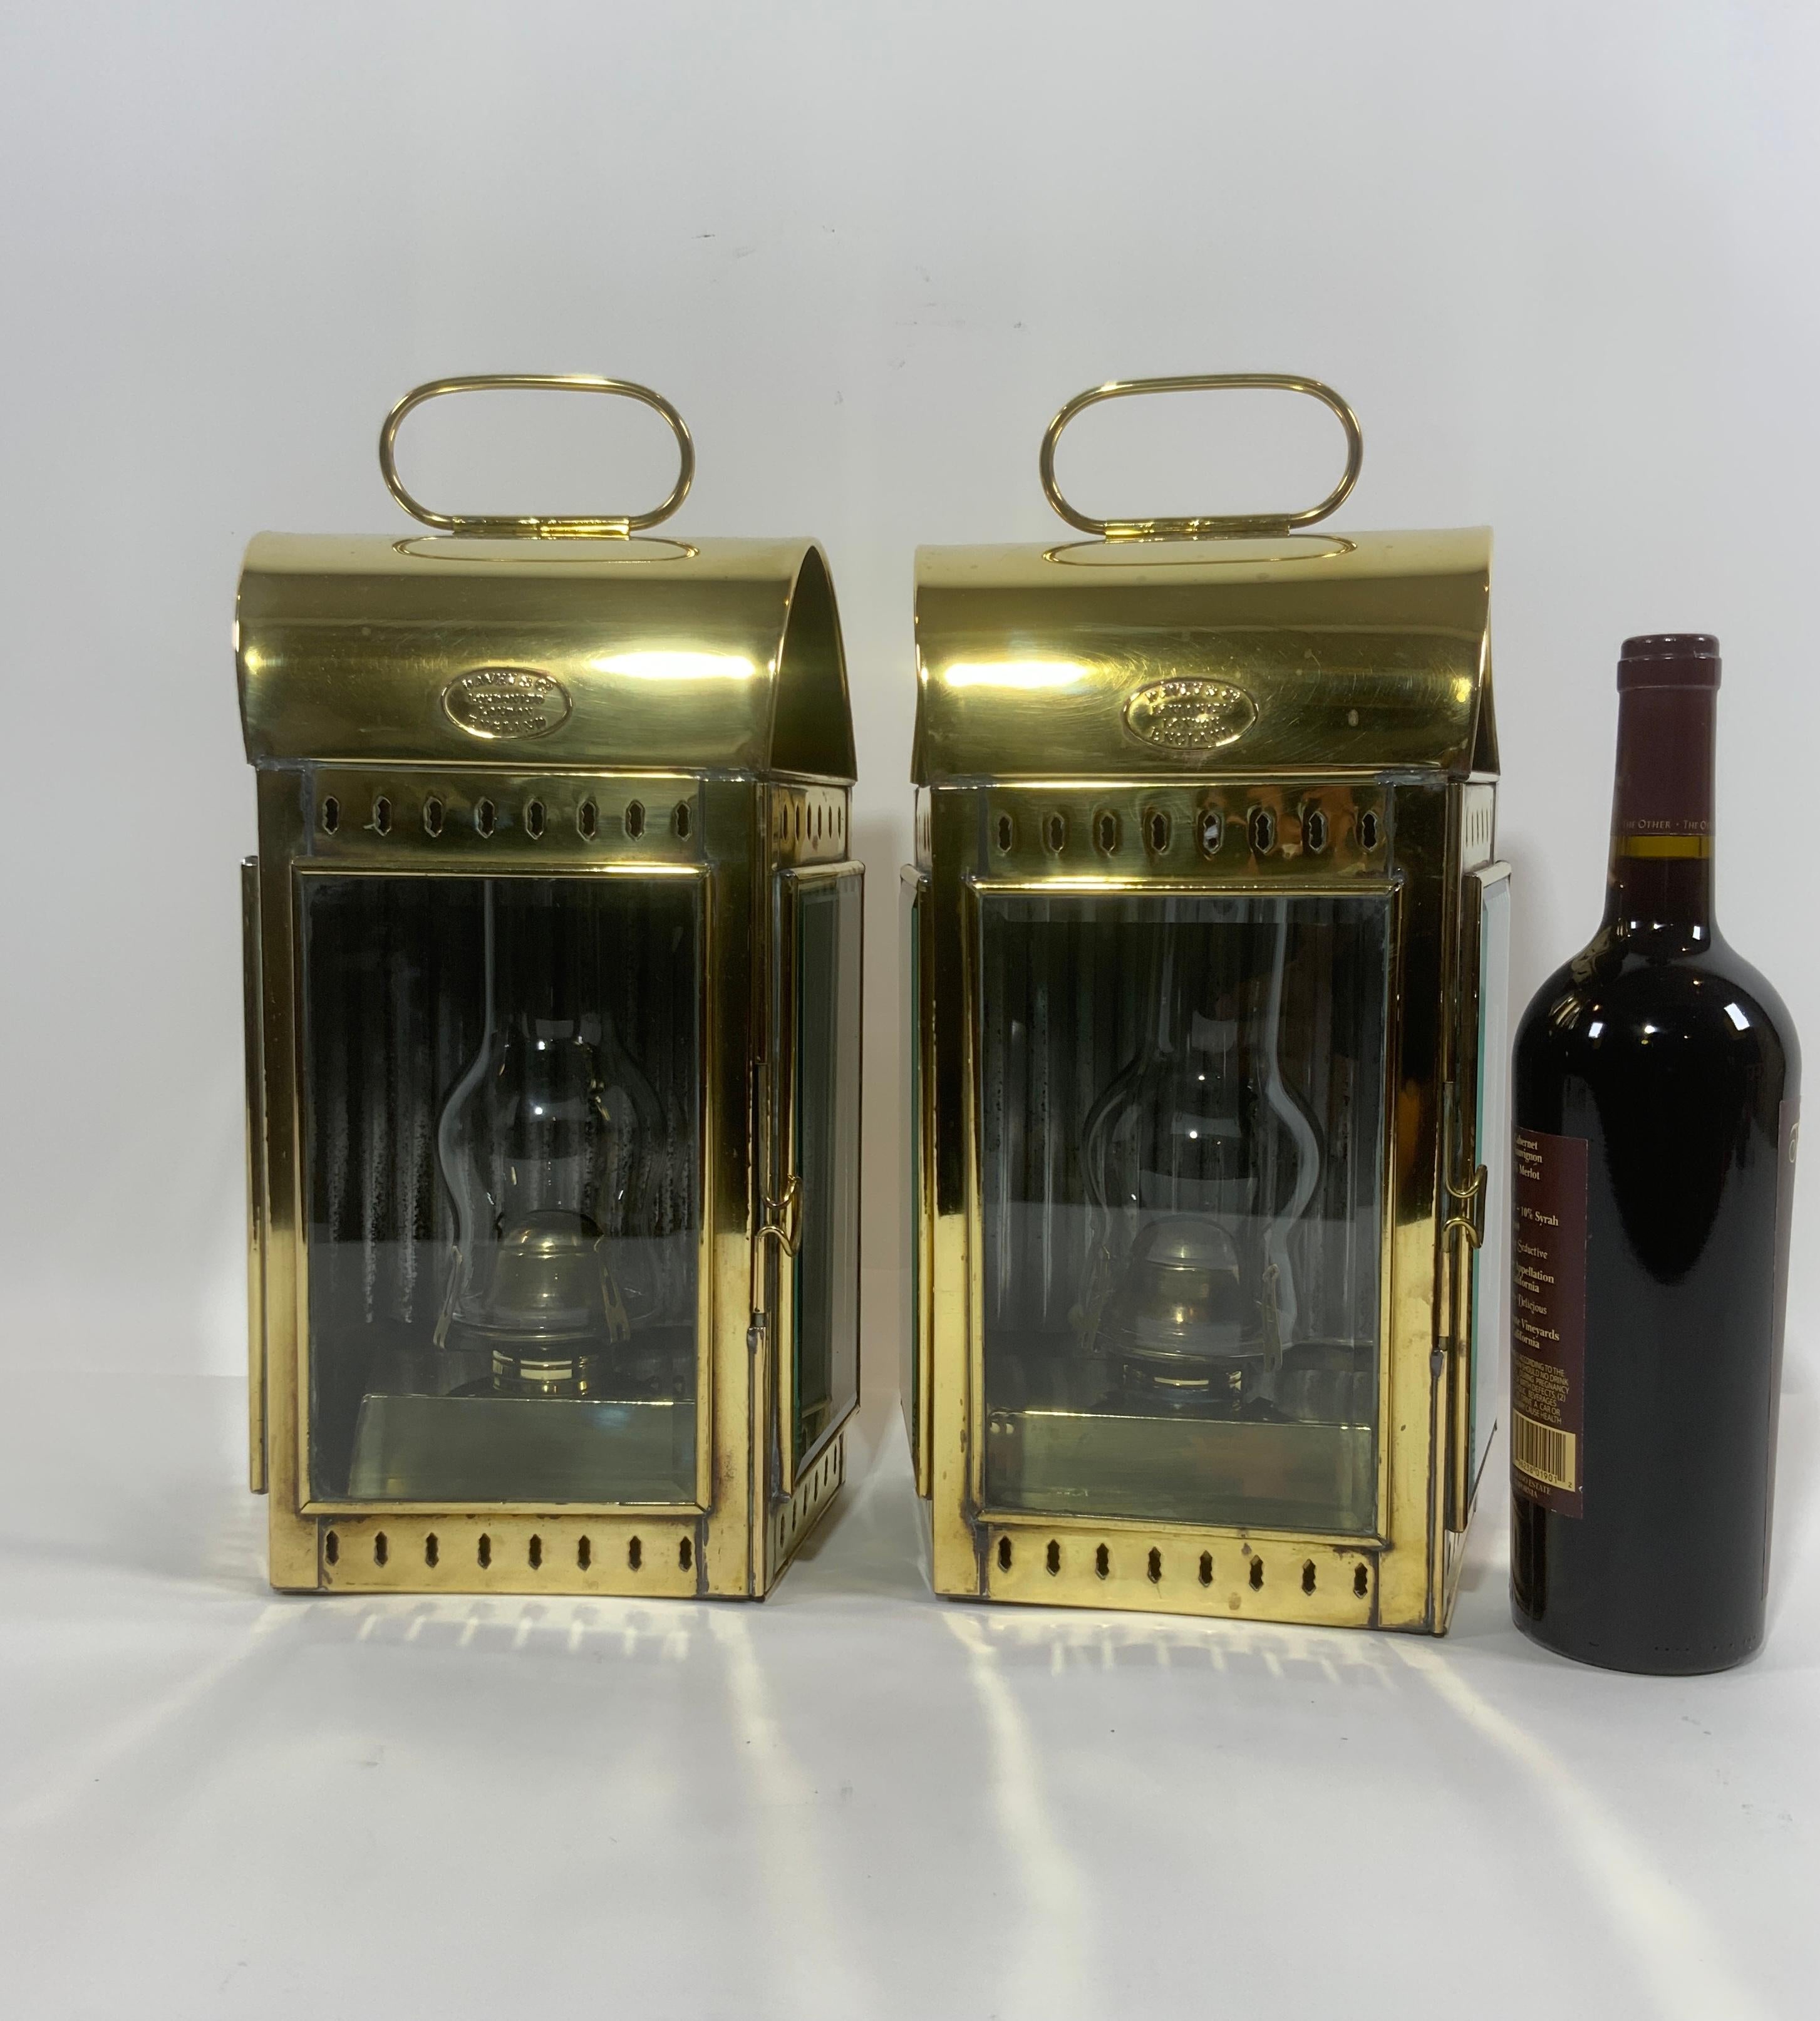 Pair of brass yacht cabin lanterns by venerable English maker Davey of London. Fine pair of matching oil lanterns with burner and globes, reflector panels are attached in both and they are fitted with hinged doors. Embossed brass makers badges from